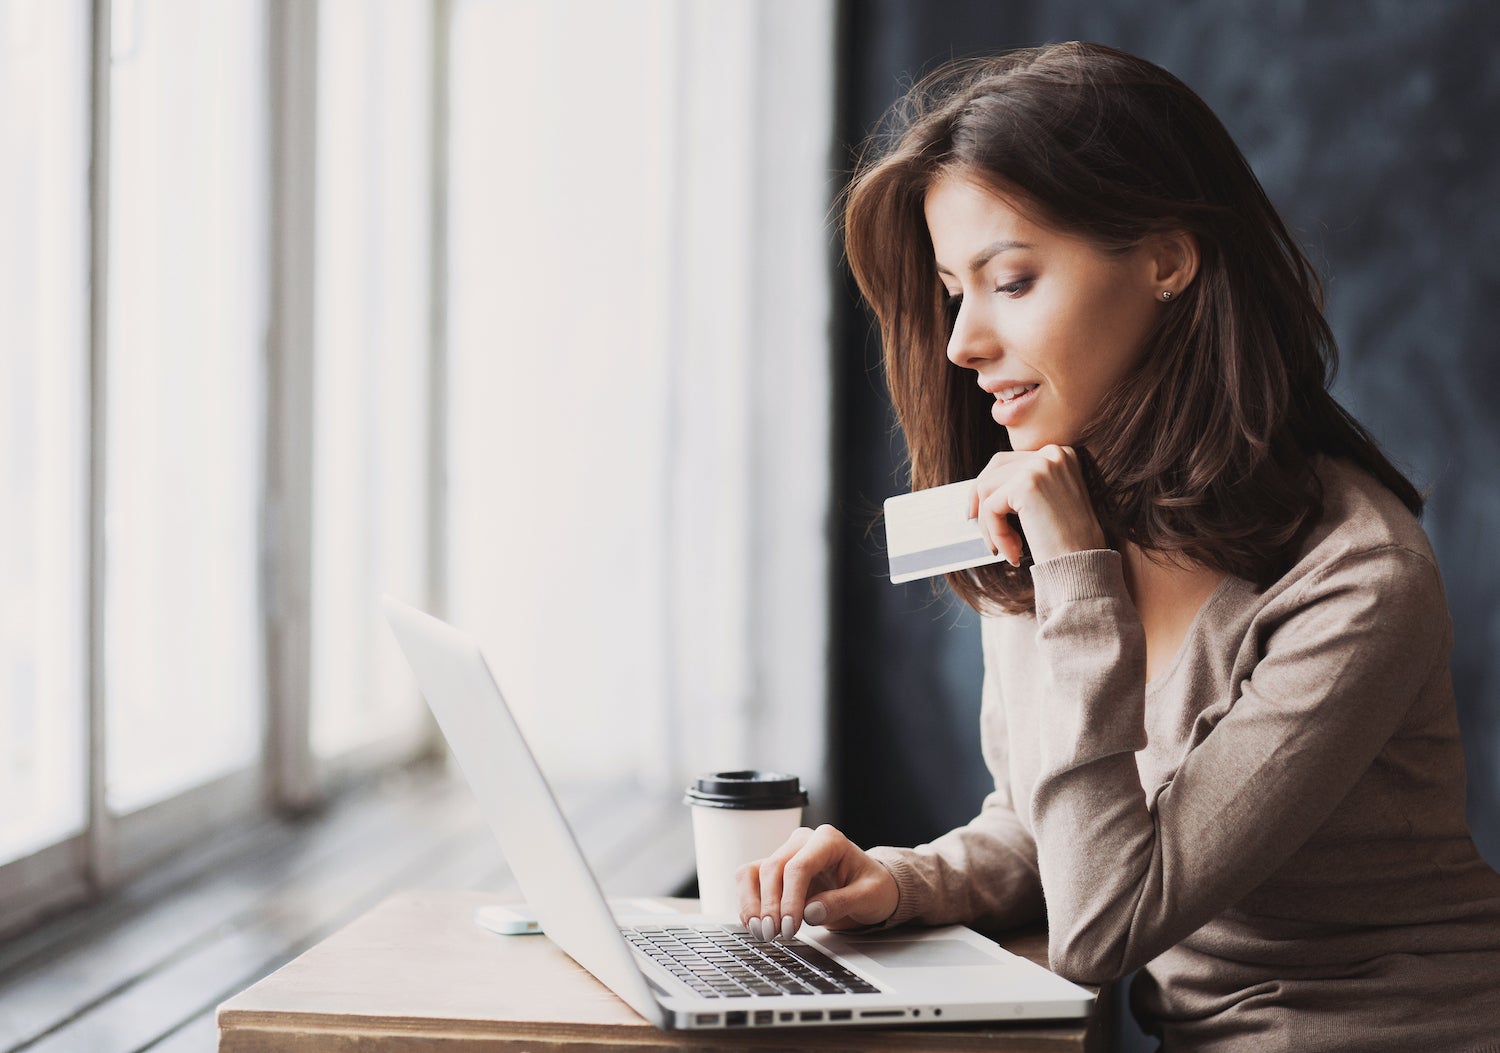 Woman Holding Credit Card in Front of Laptop